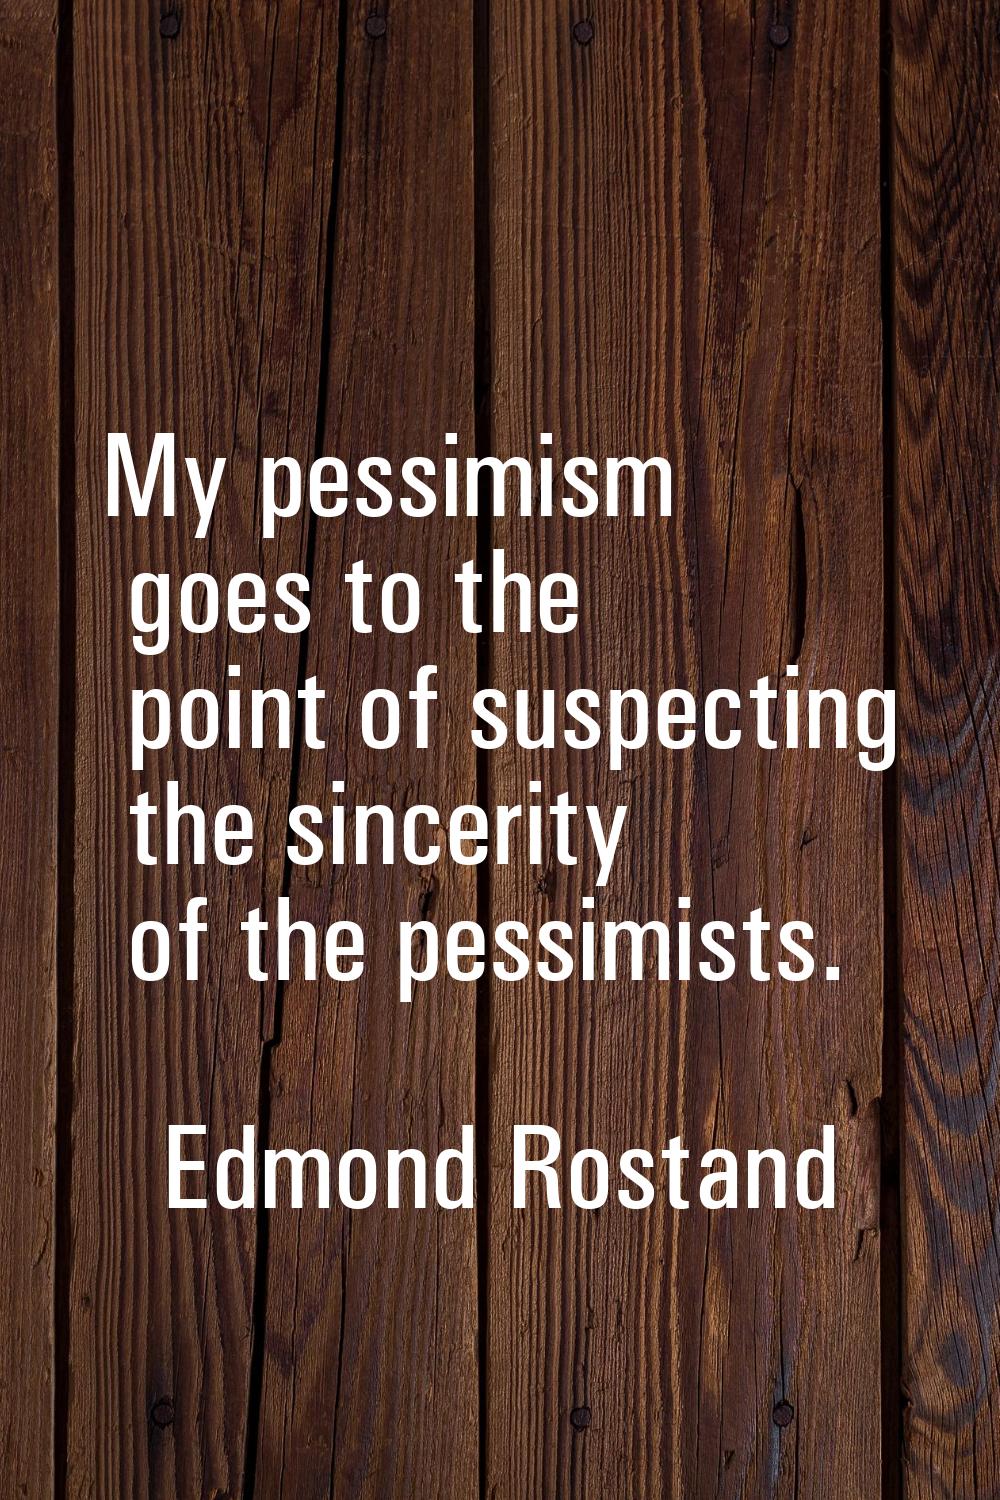 My pessimism goes to the point of suspecting the sincerity of the pessimists.